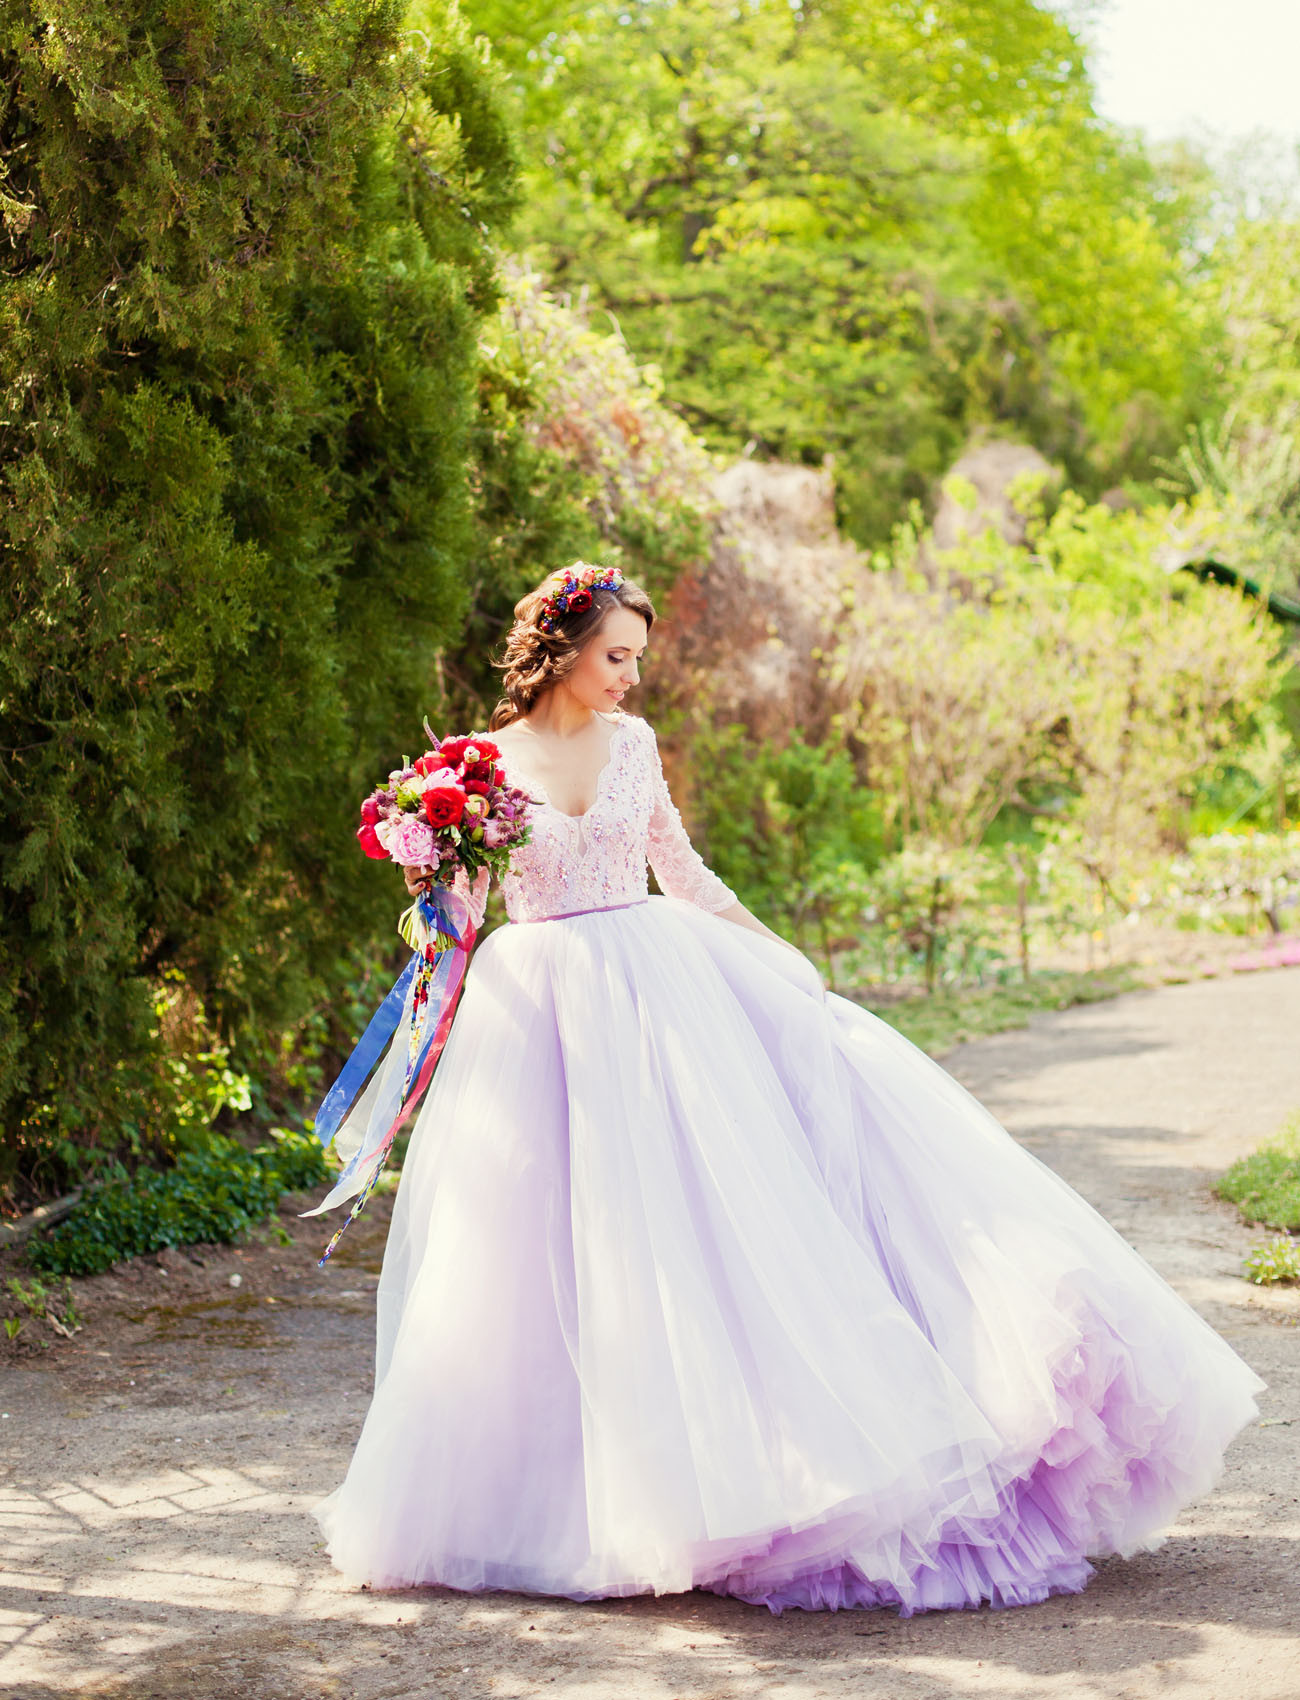 Lilac Wedding Dress
 The Bride Wore Lavender in this Colorful Kiev Wedding